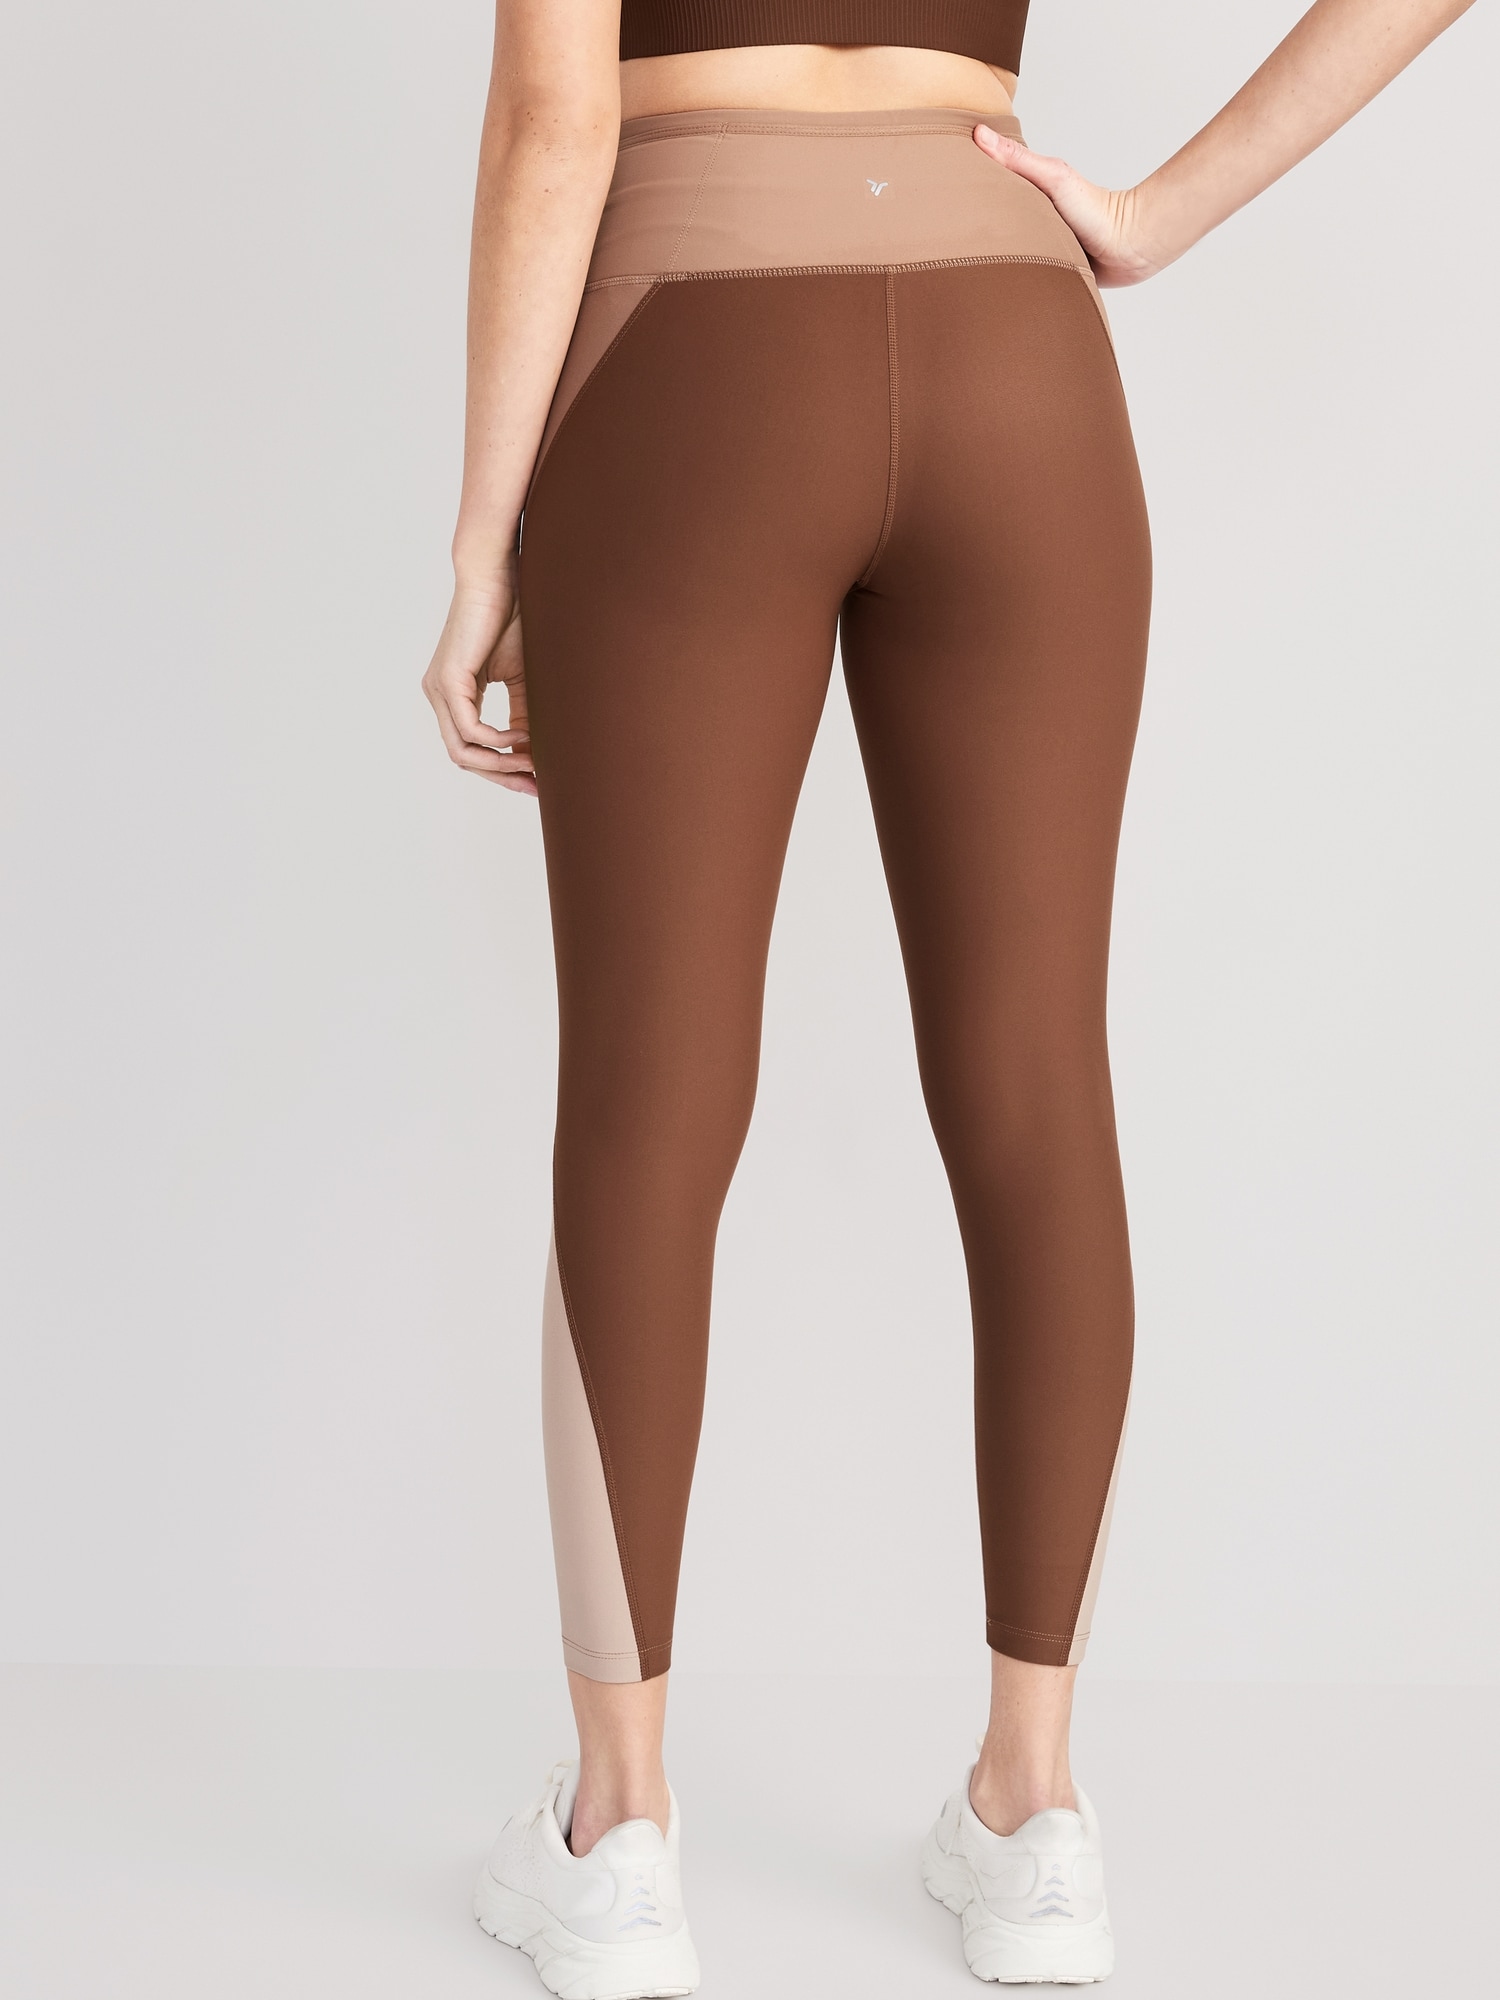 Old Navy - High-Waisted PowerSoft 7/8 Mixed-Fabric Leggings for Women brown